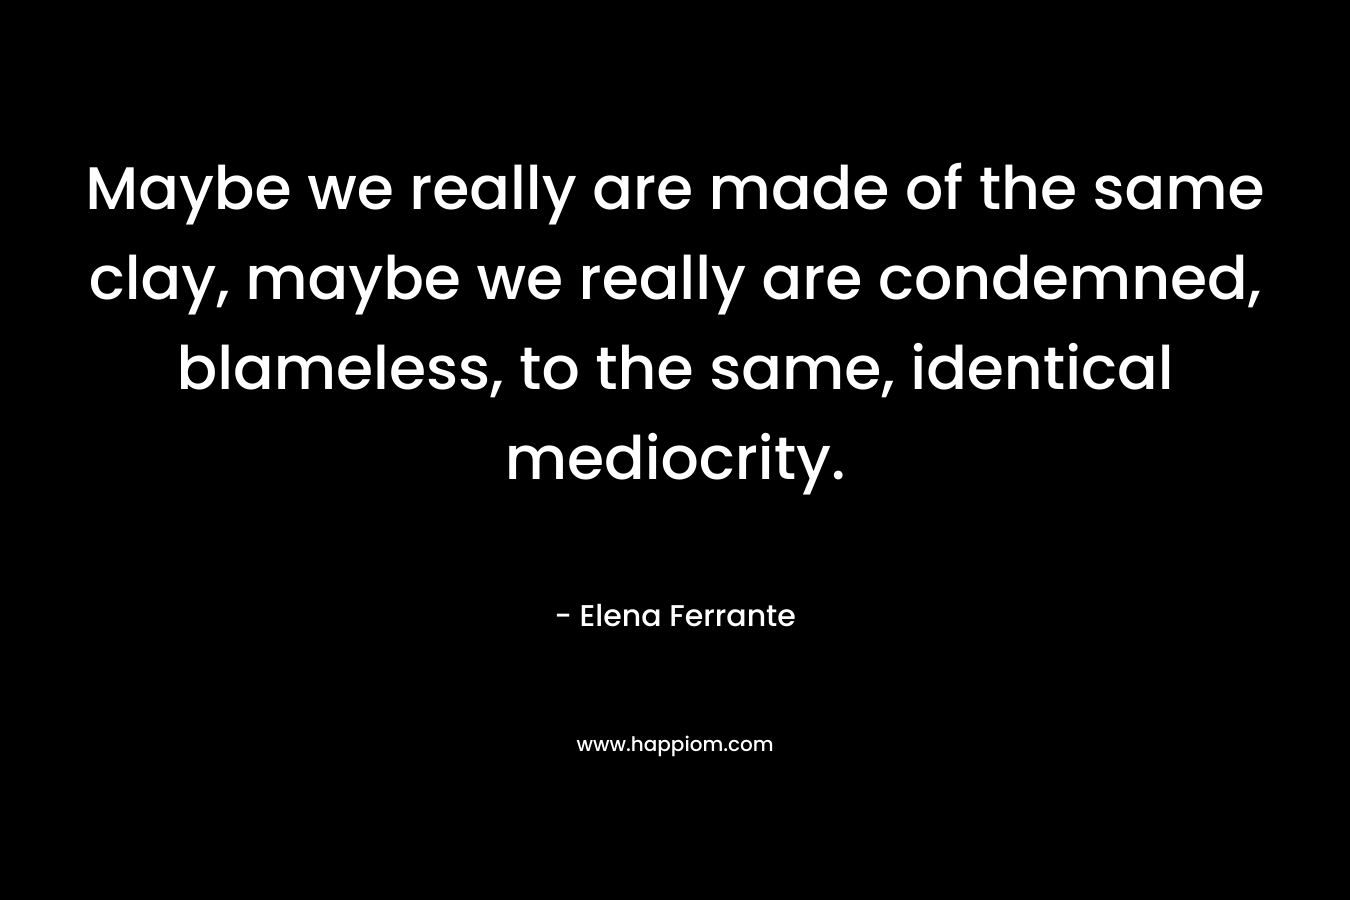 Maybe we really are made of the same clay, maybe we really are condemned, blameless, to the same, identical mediocrity. – Elena Ferrante